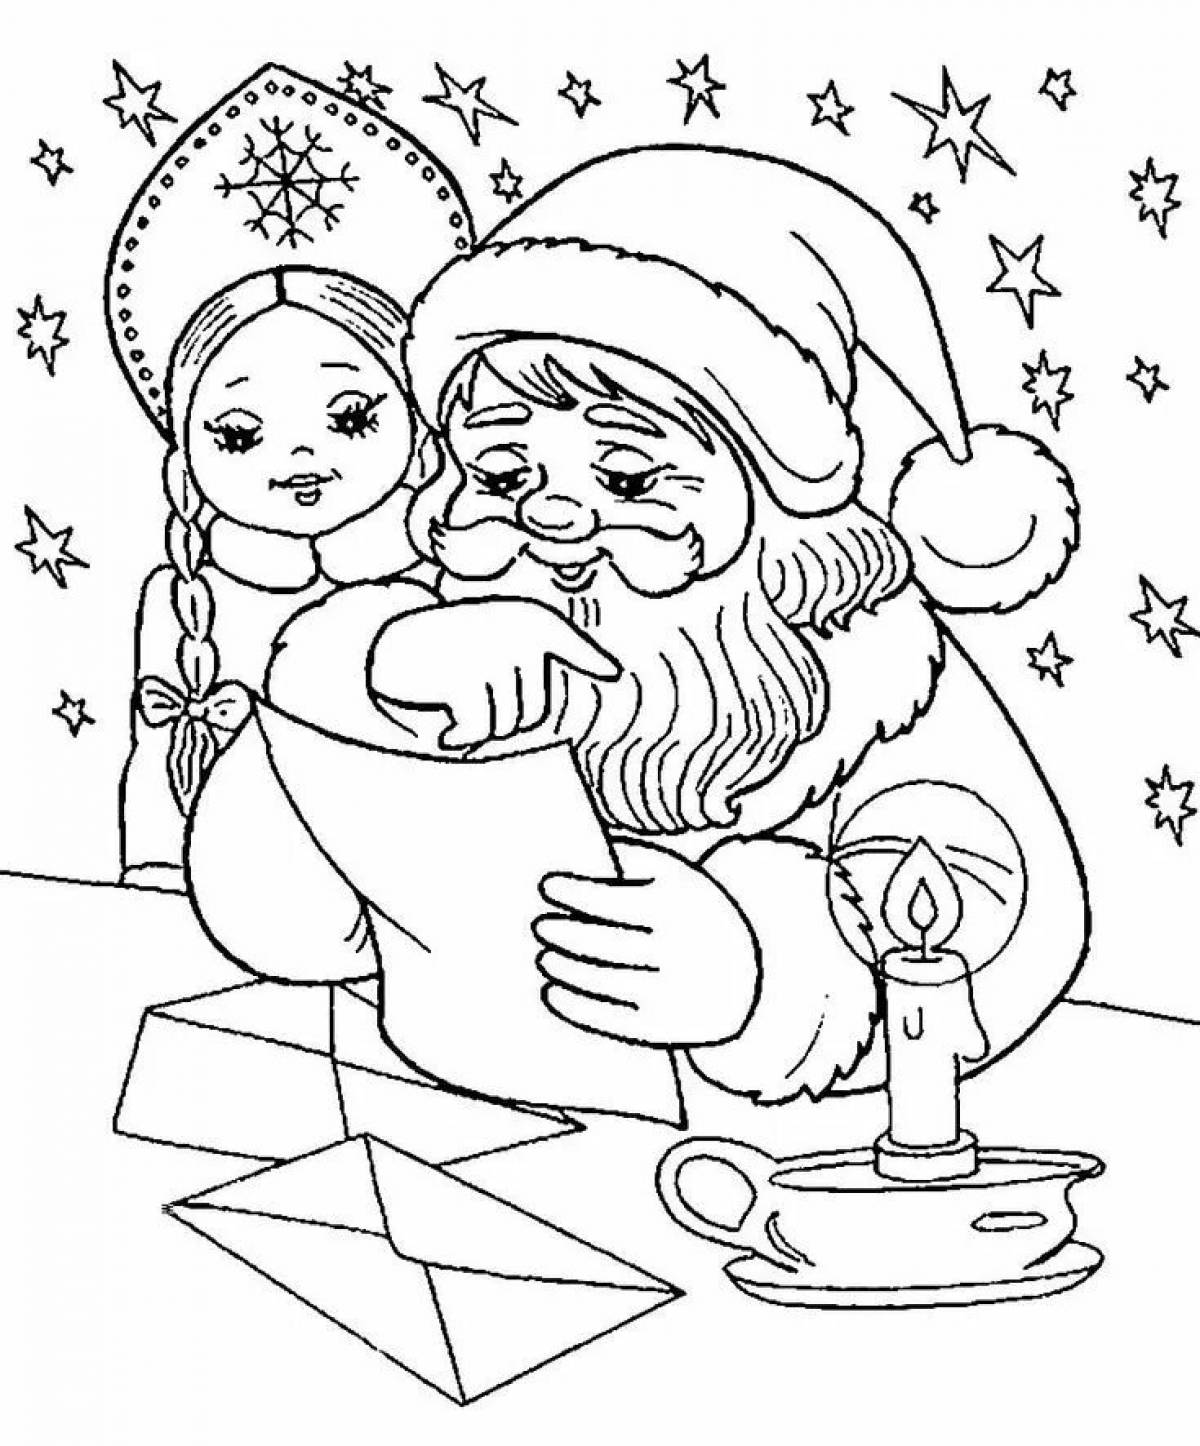 Santa Claus and Snow Maiden drawing #9